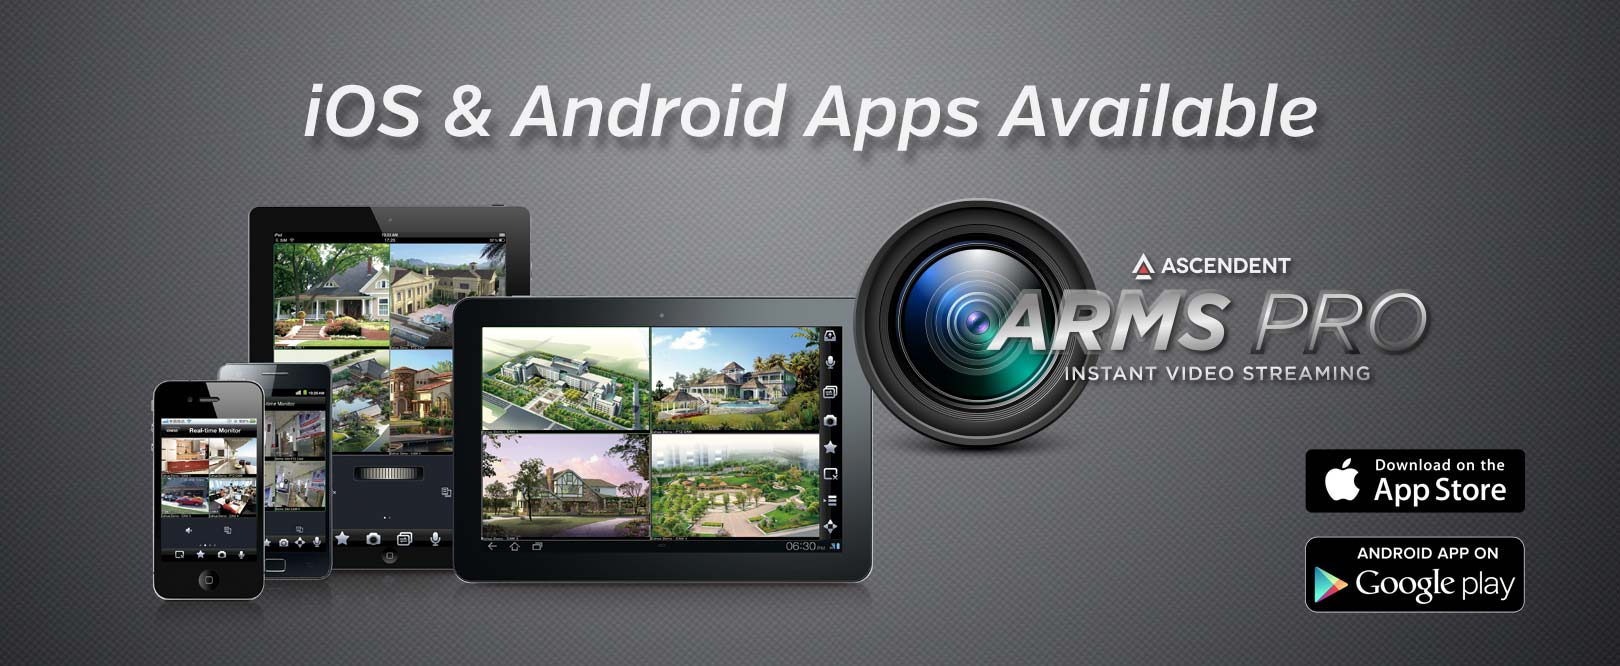 iOS & Android Apps Available